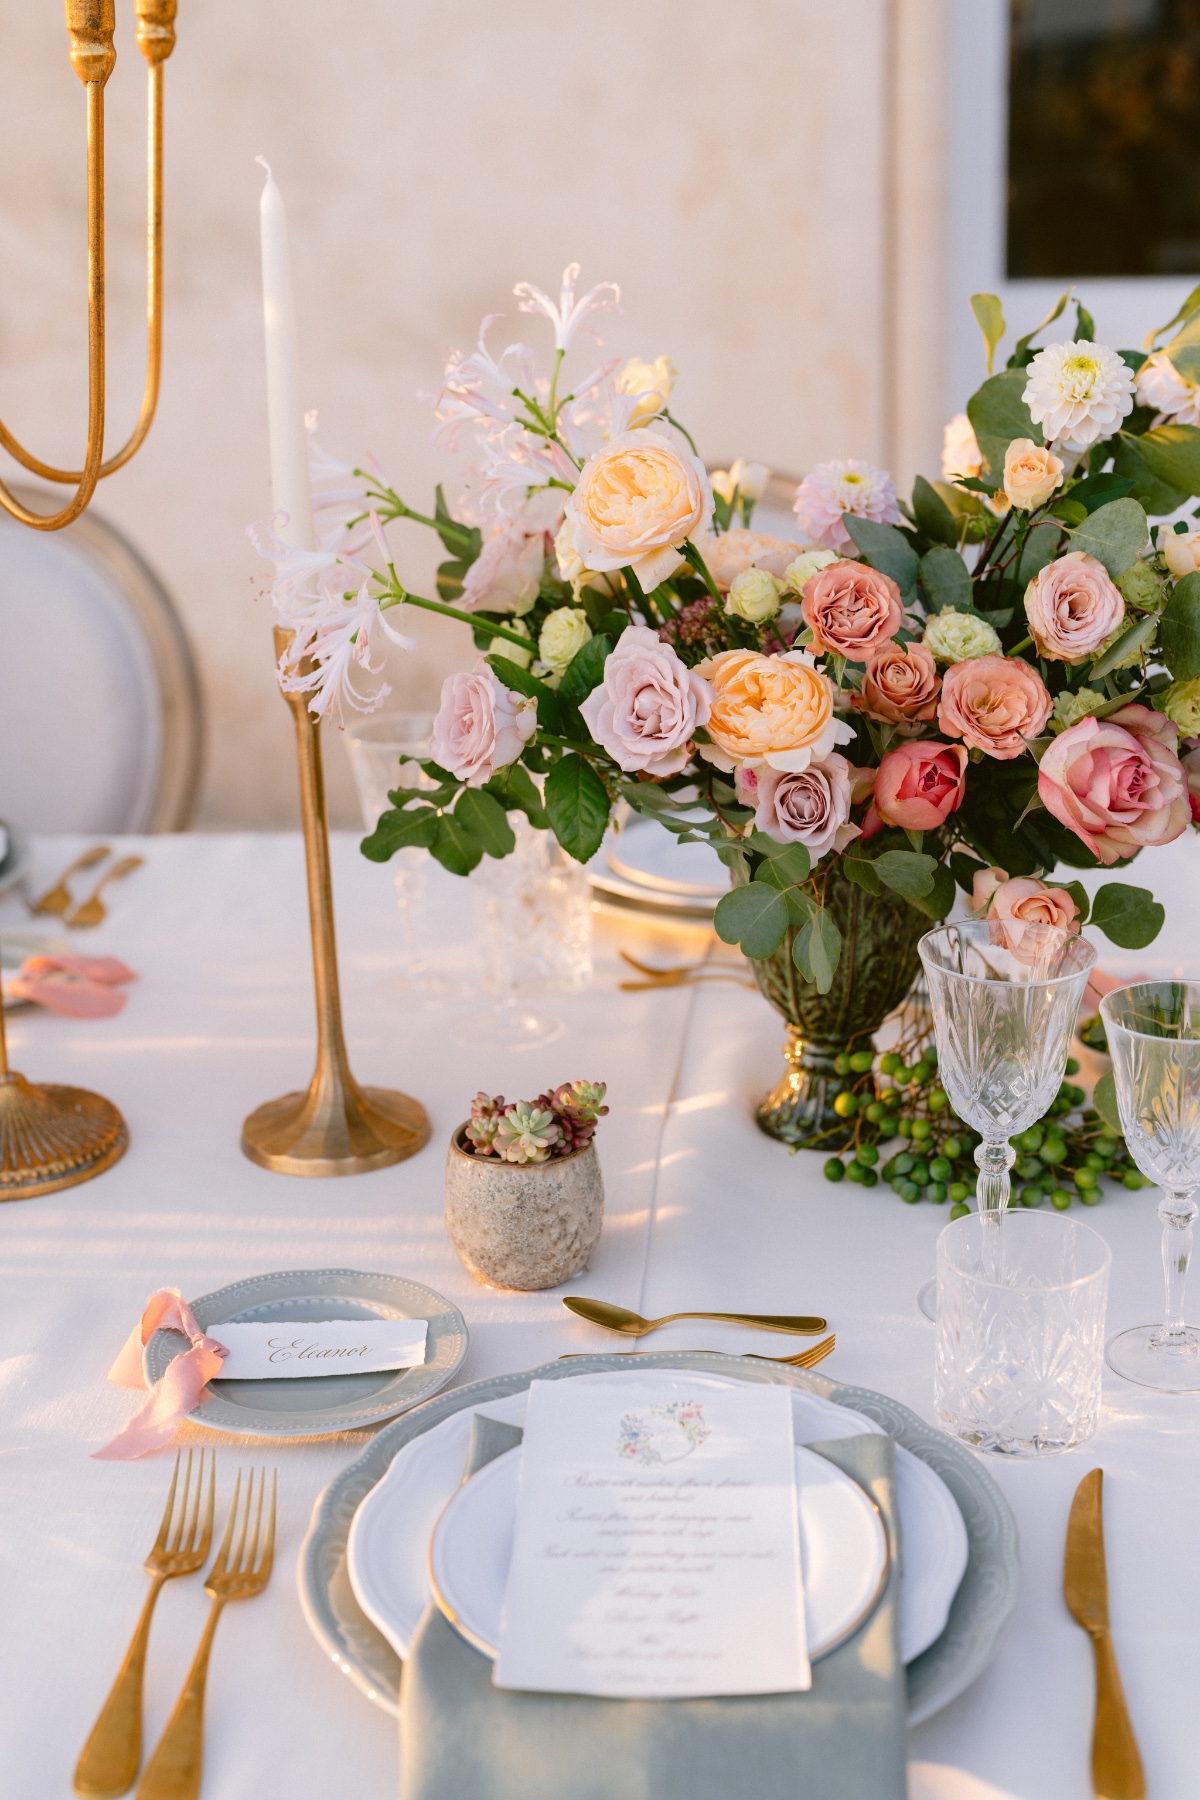 sunset-inspired centerpieces